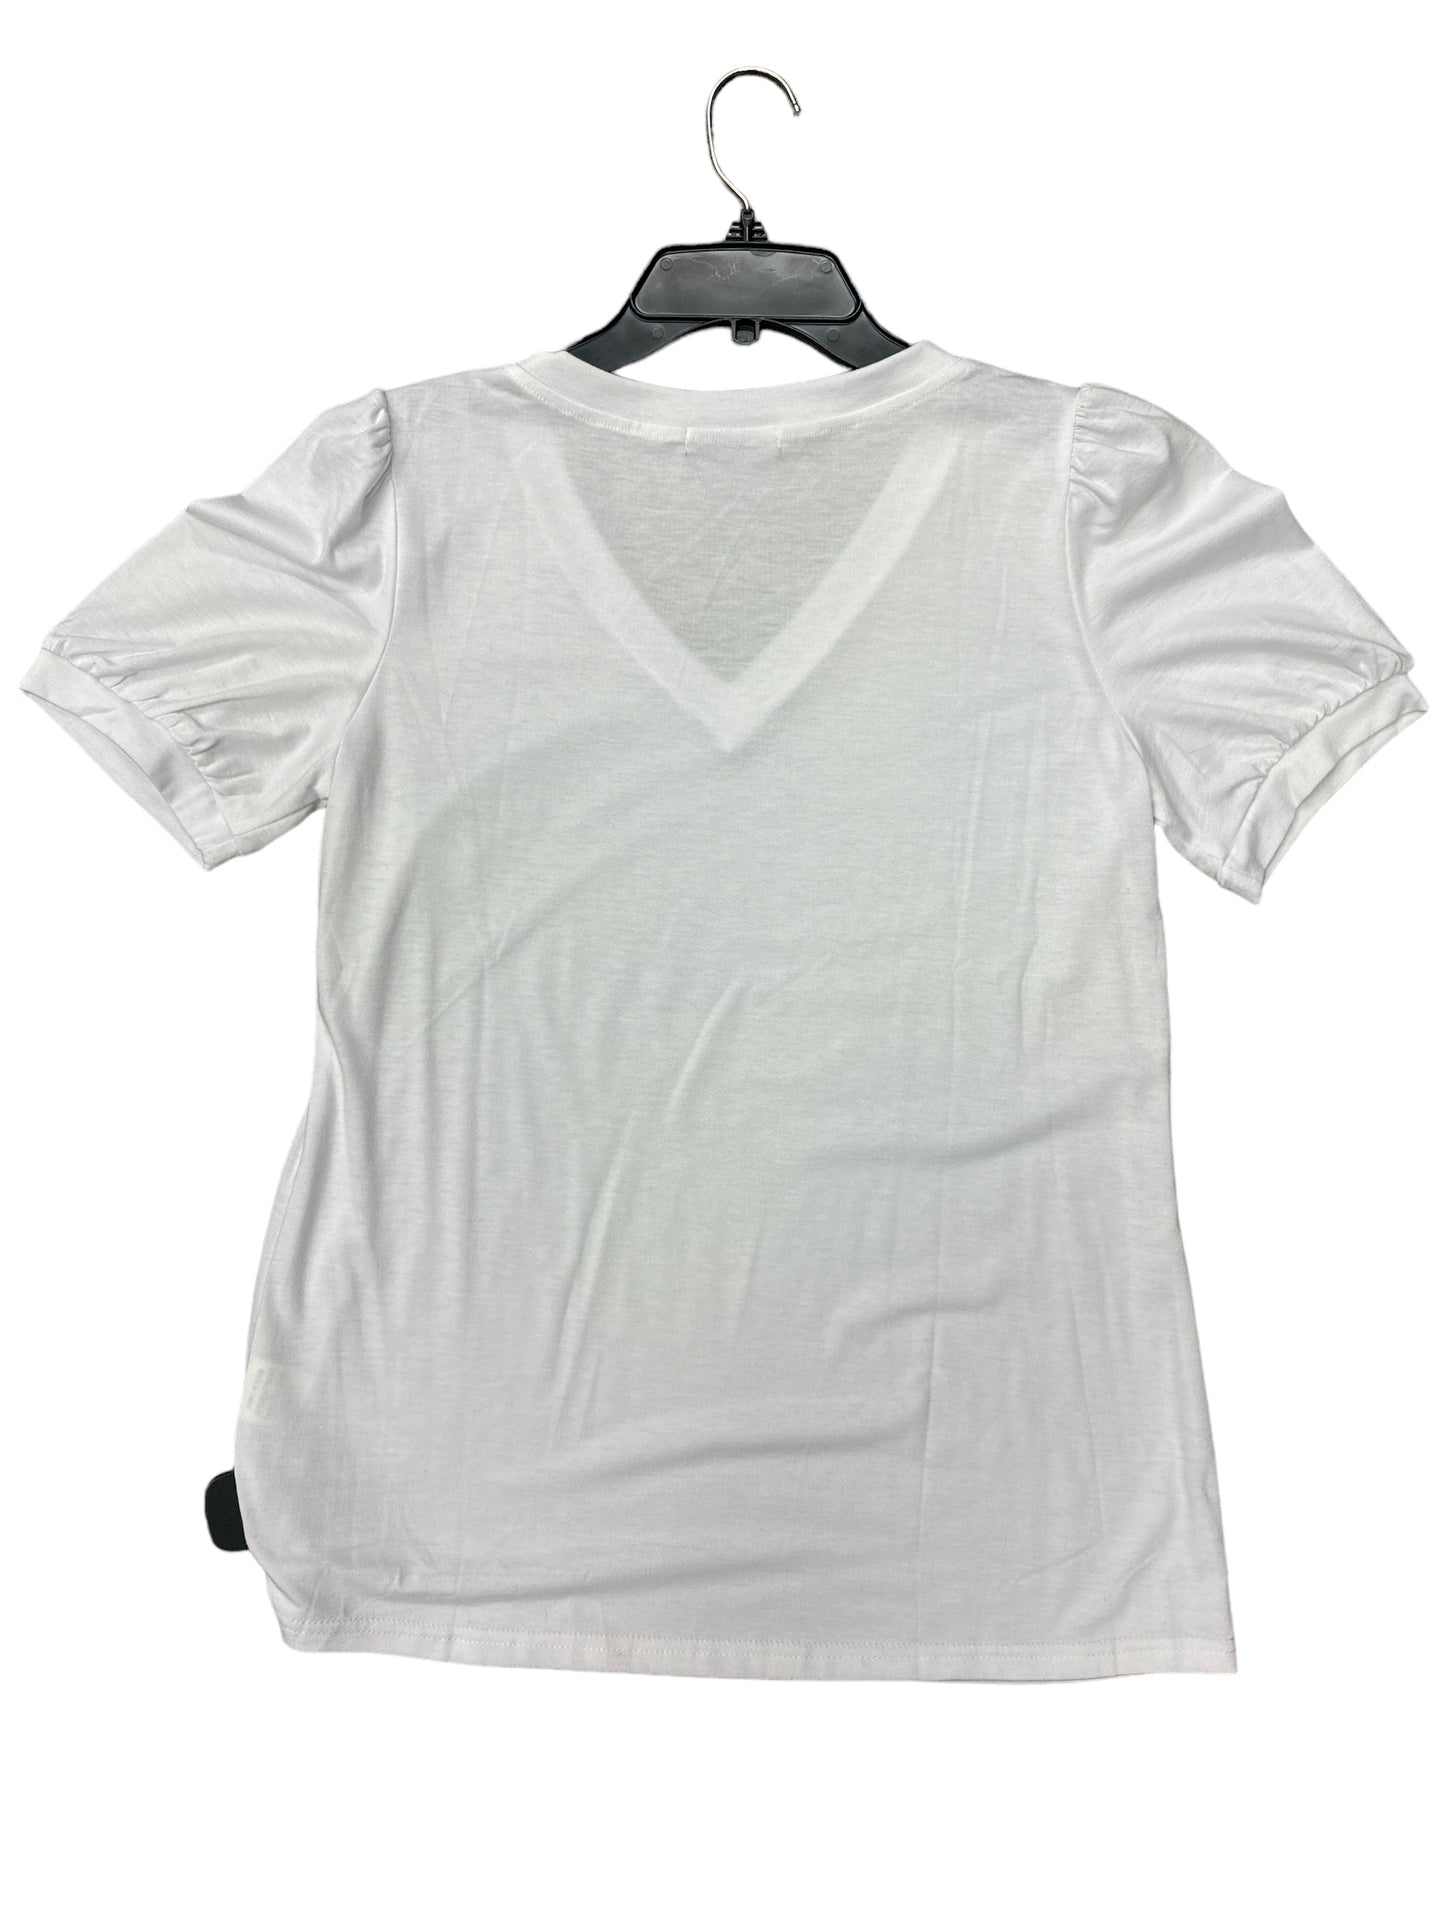 Top Short Sleeve Basic By Clothes Mentor  Size: S